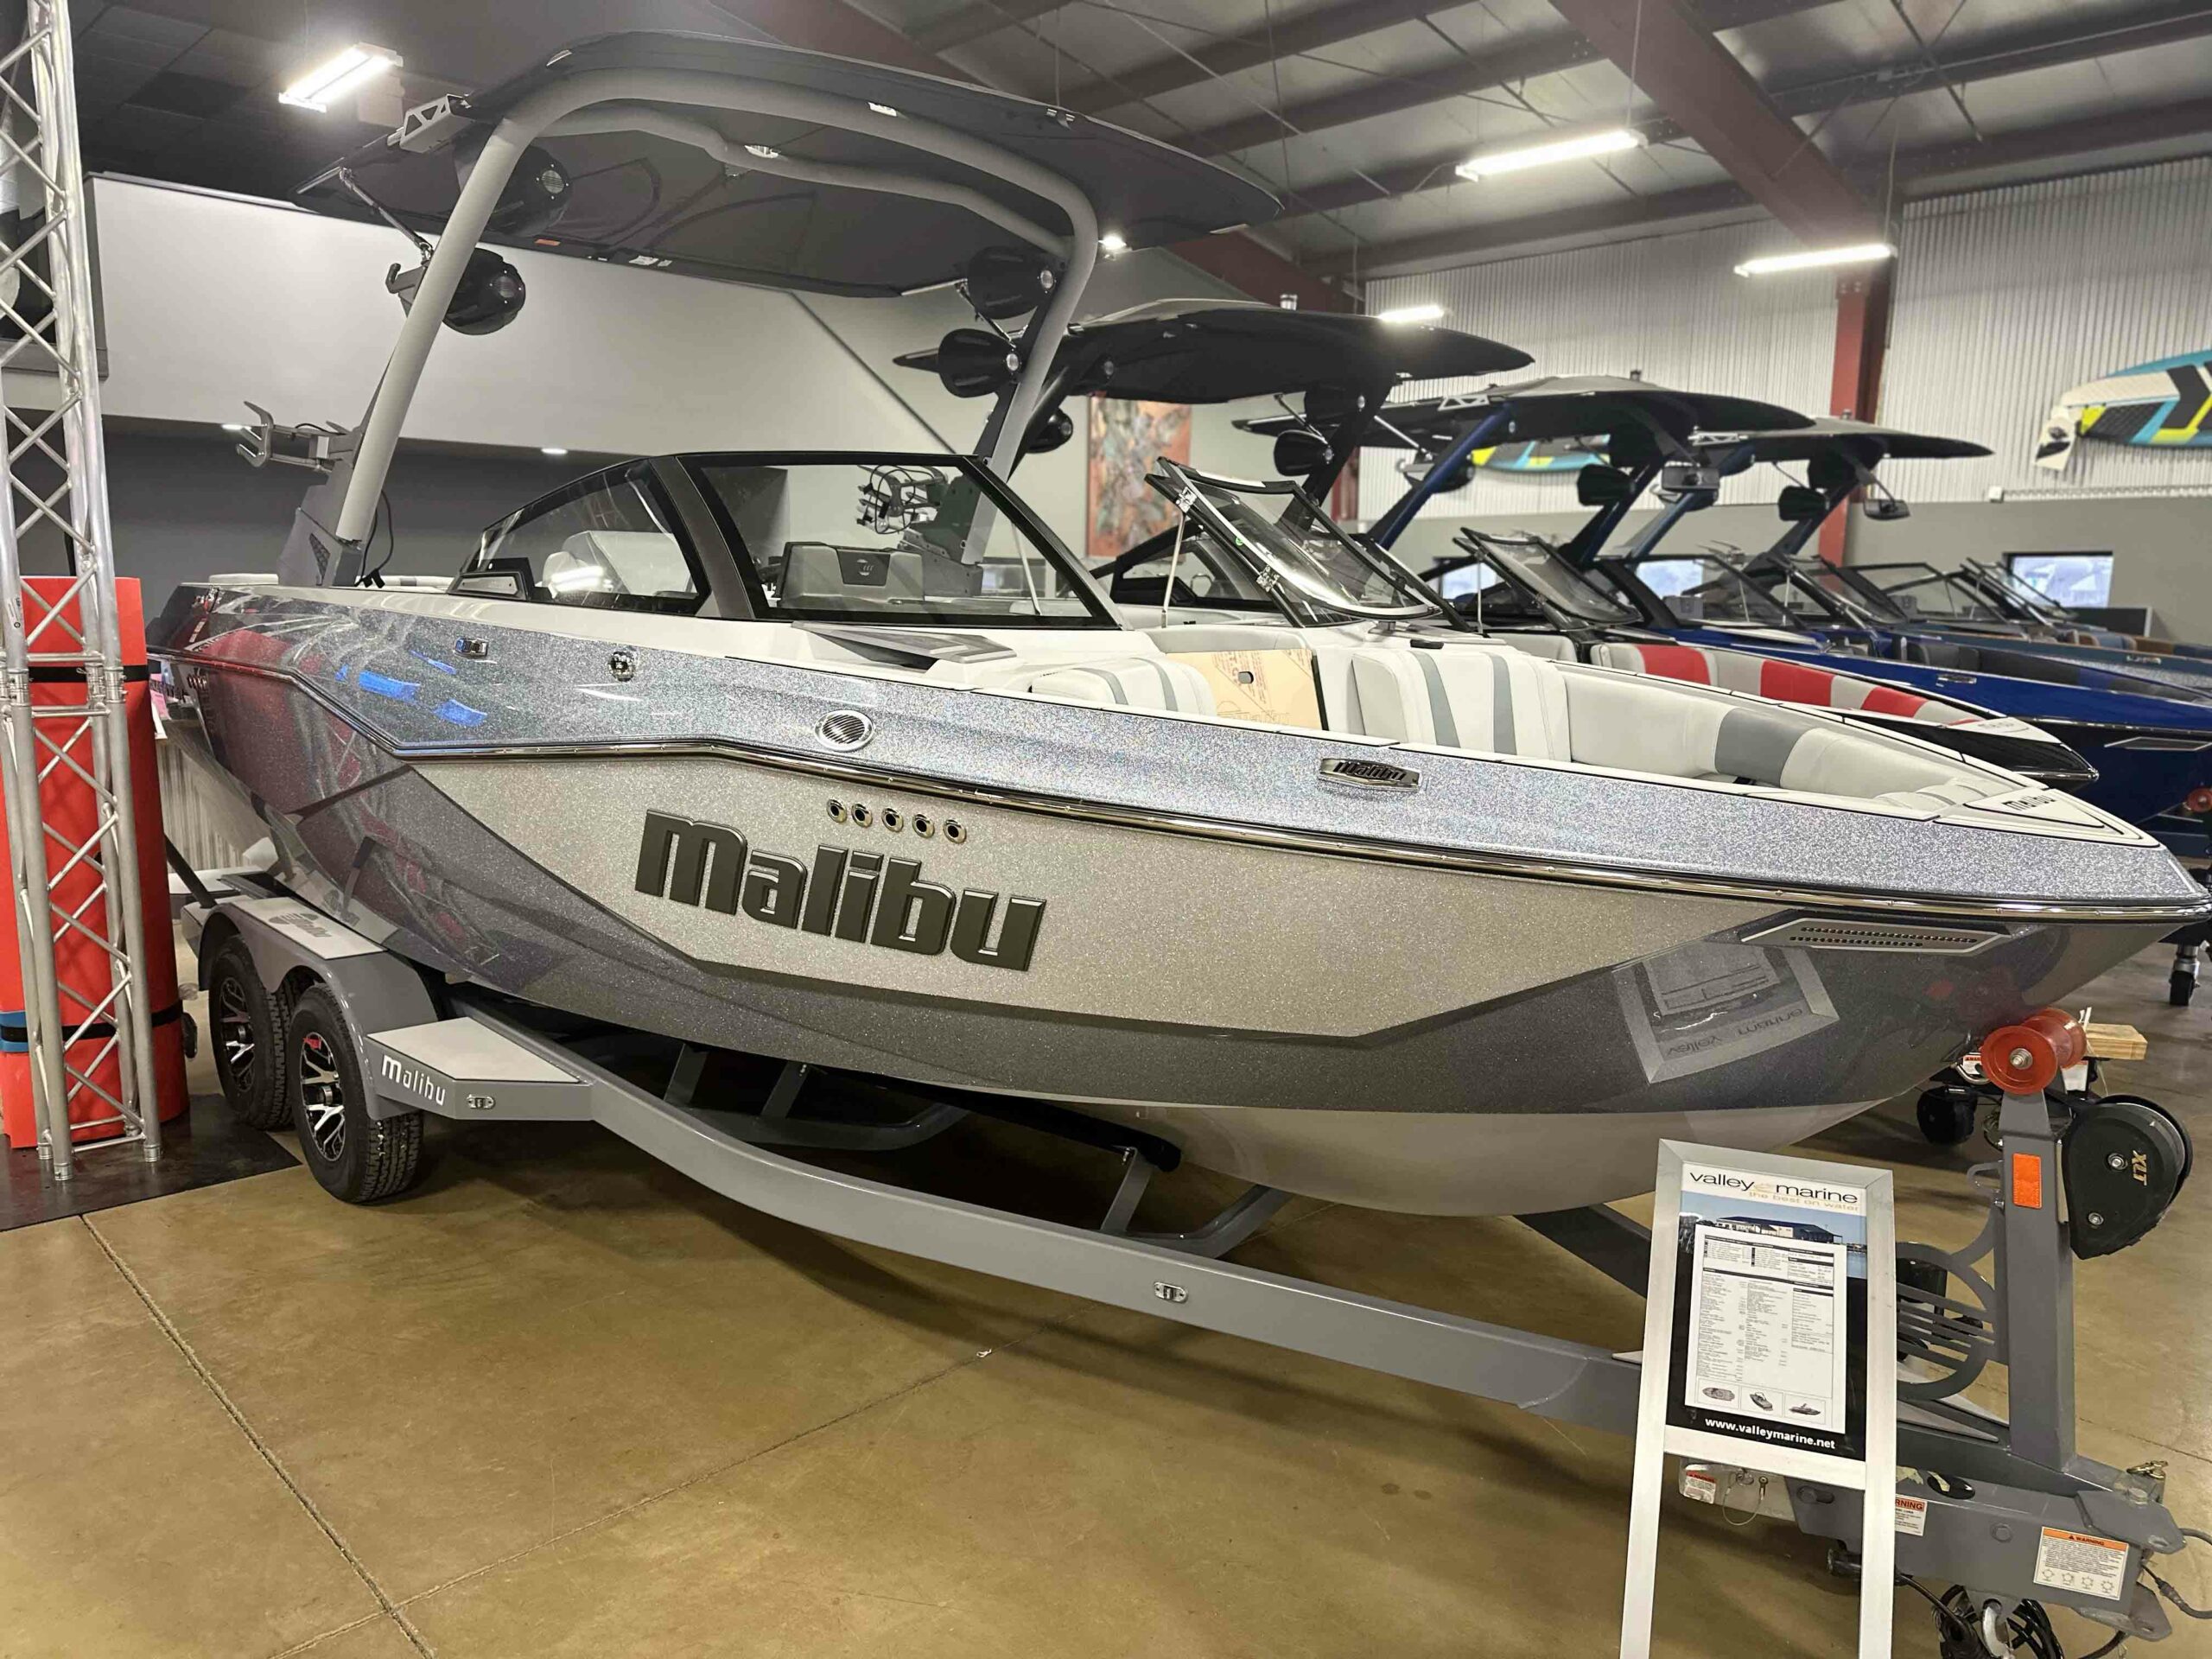 This is the front of the Malibu Wakesetter 22 LSV.